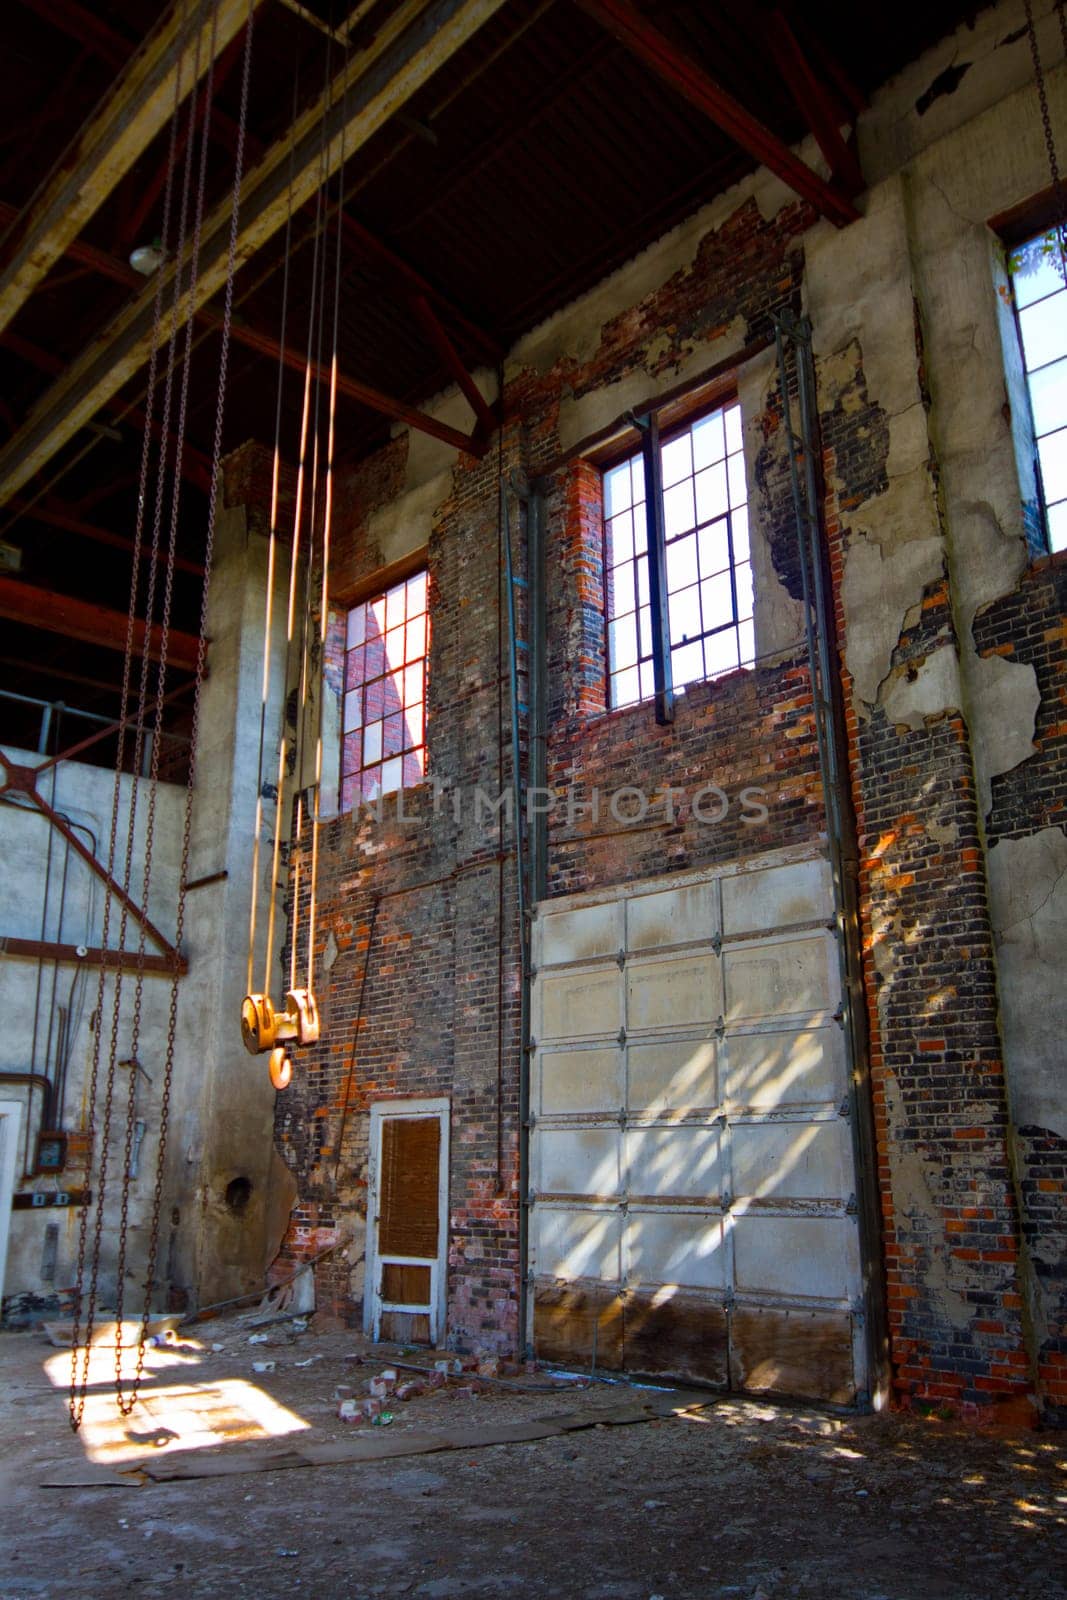 Abandoned Industrial Warehouse Interior with Deteriorating Brickwork and Hand Chain Hoist by njproductions